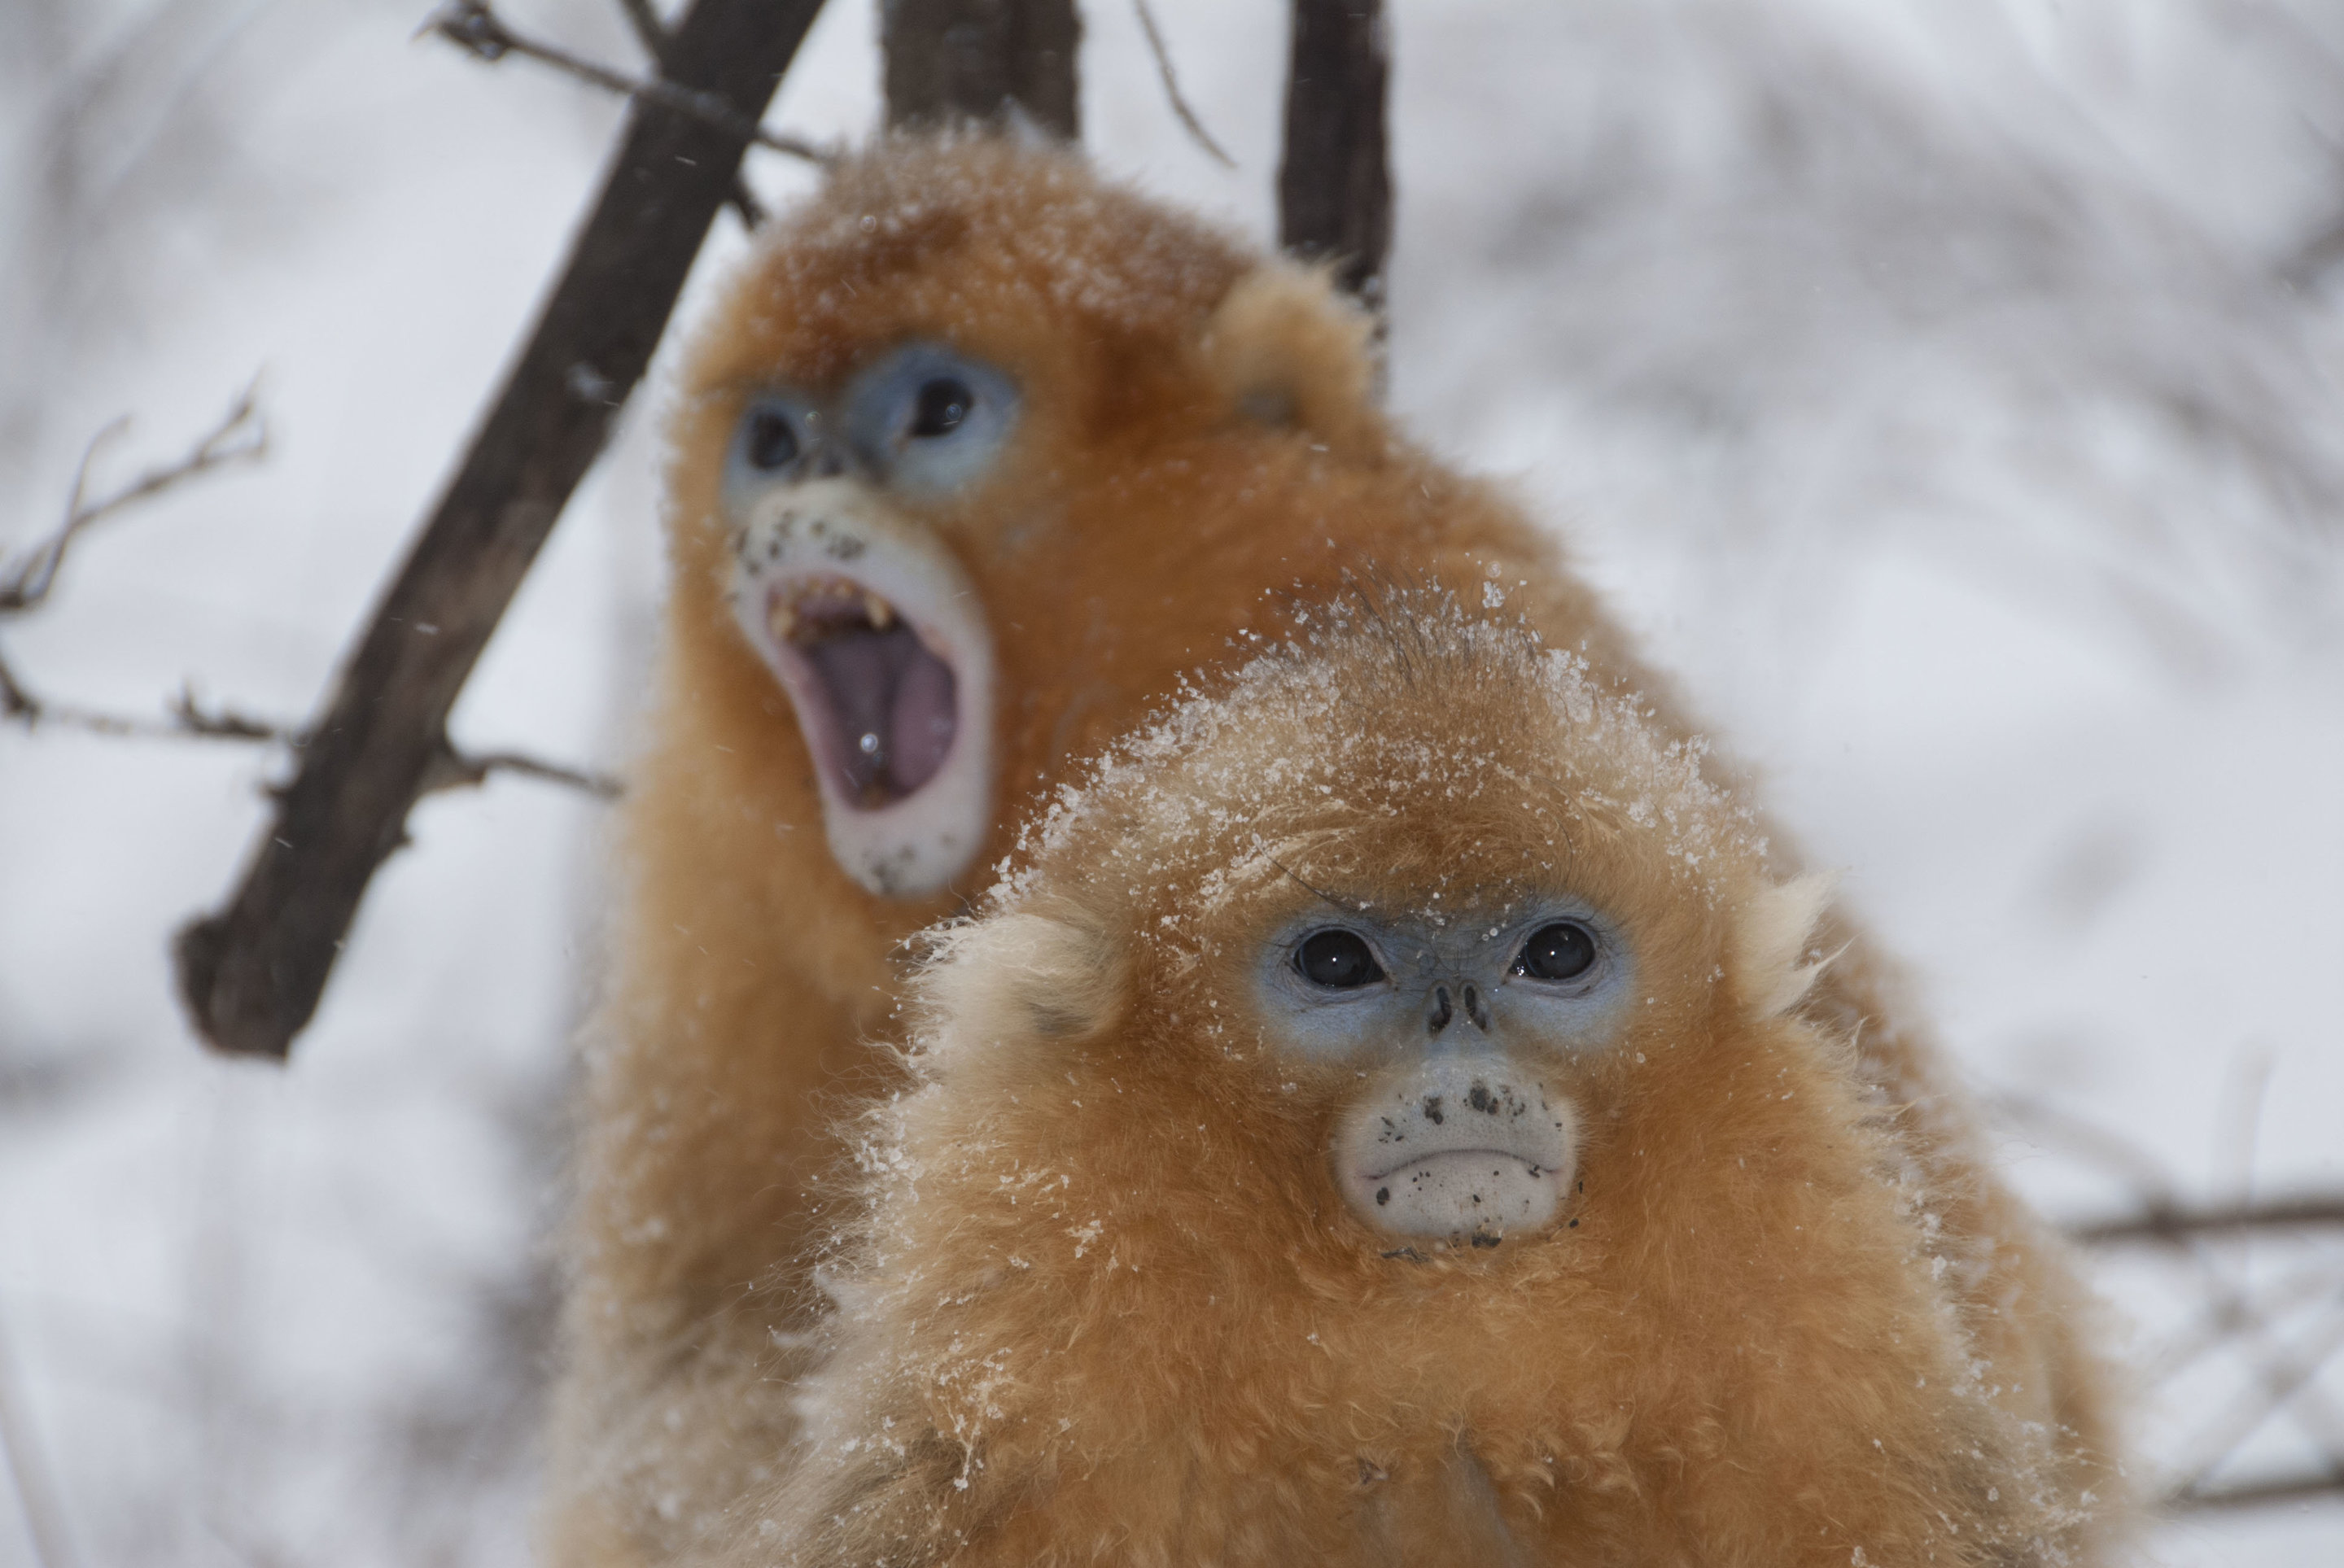 What the lie about 8 wet, cold monkeys can tell us about the